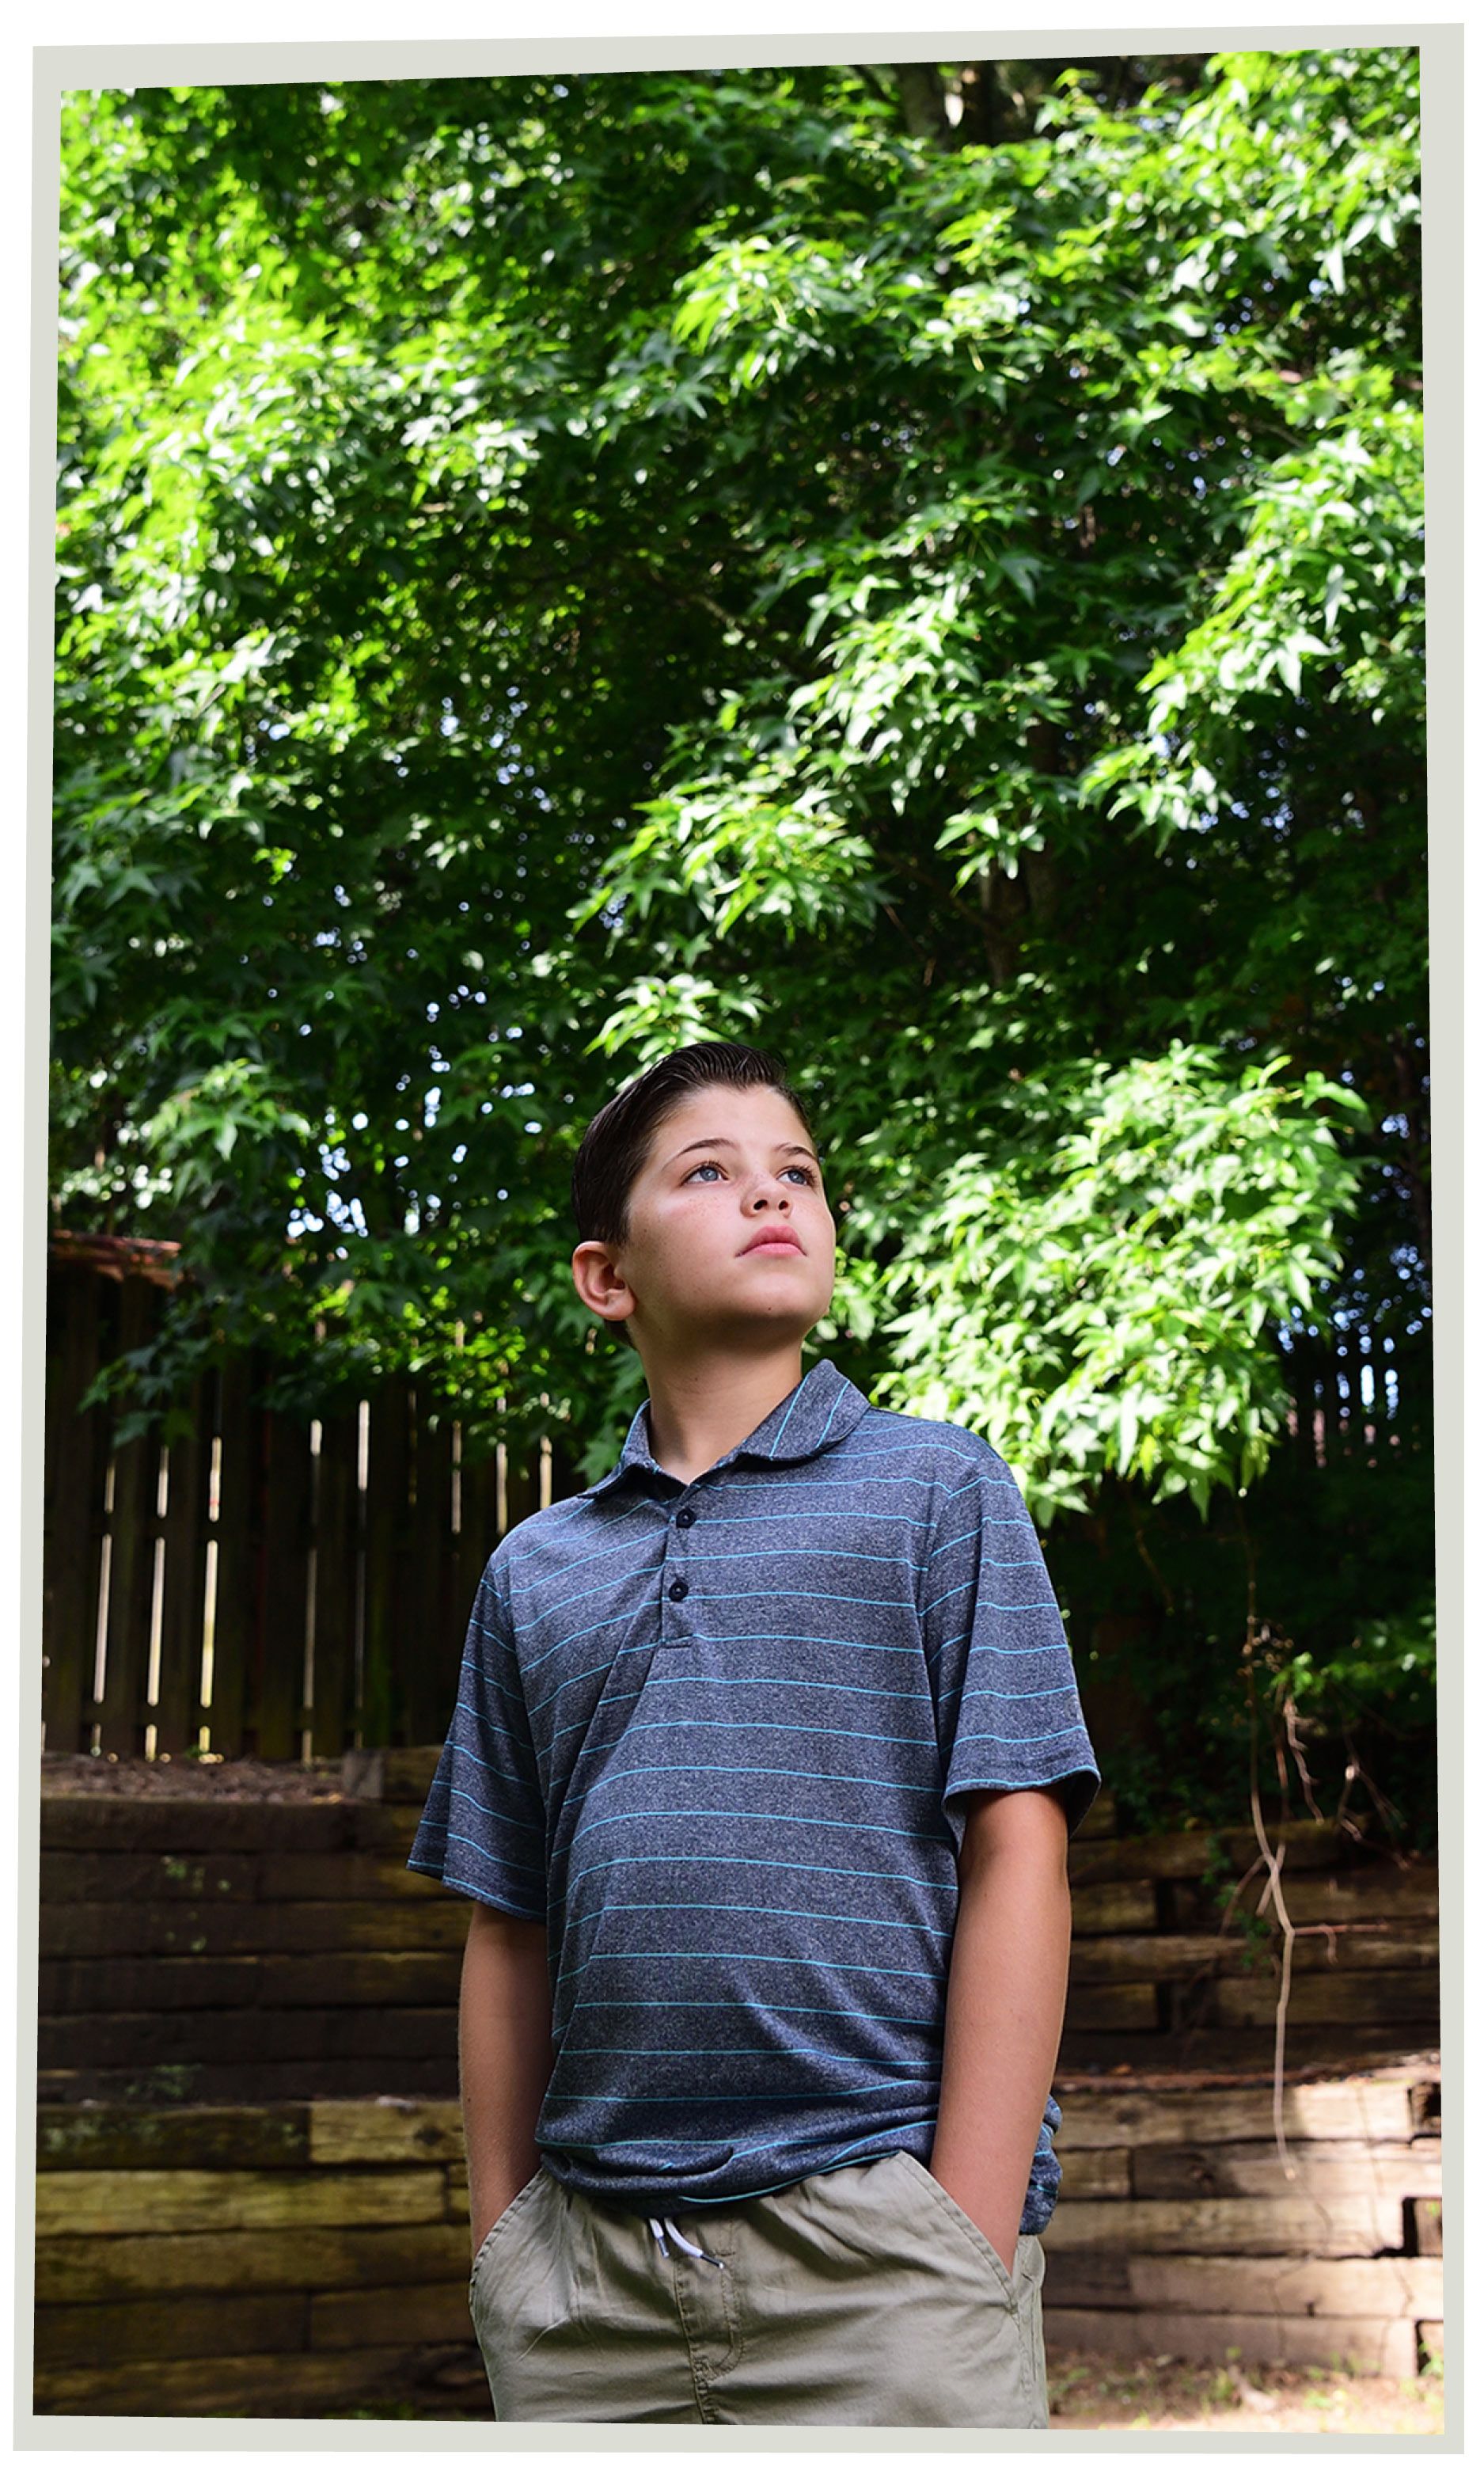 Brayden, now 10, standing in a blue shirt and tan shorts in front of the tree he fell from, a year later. 